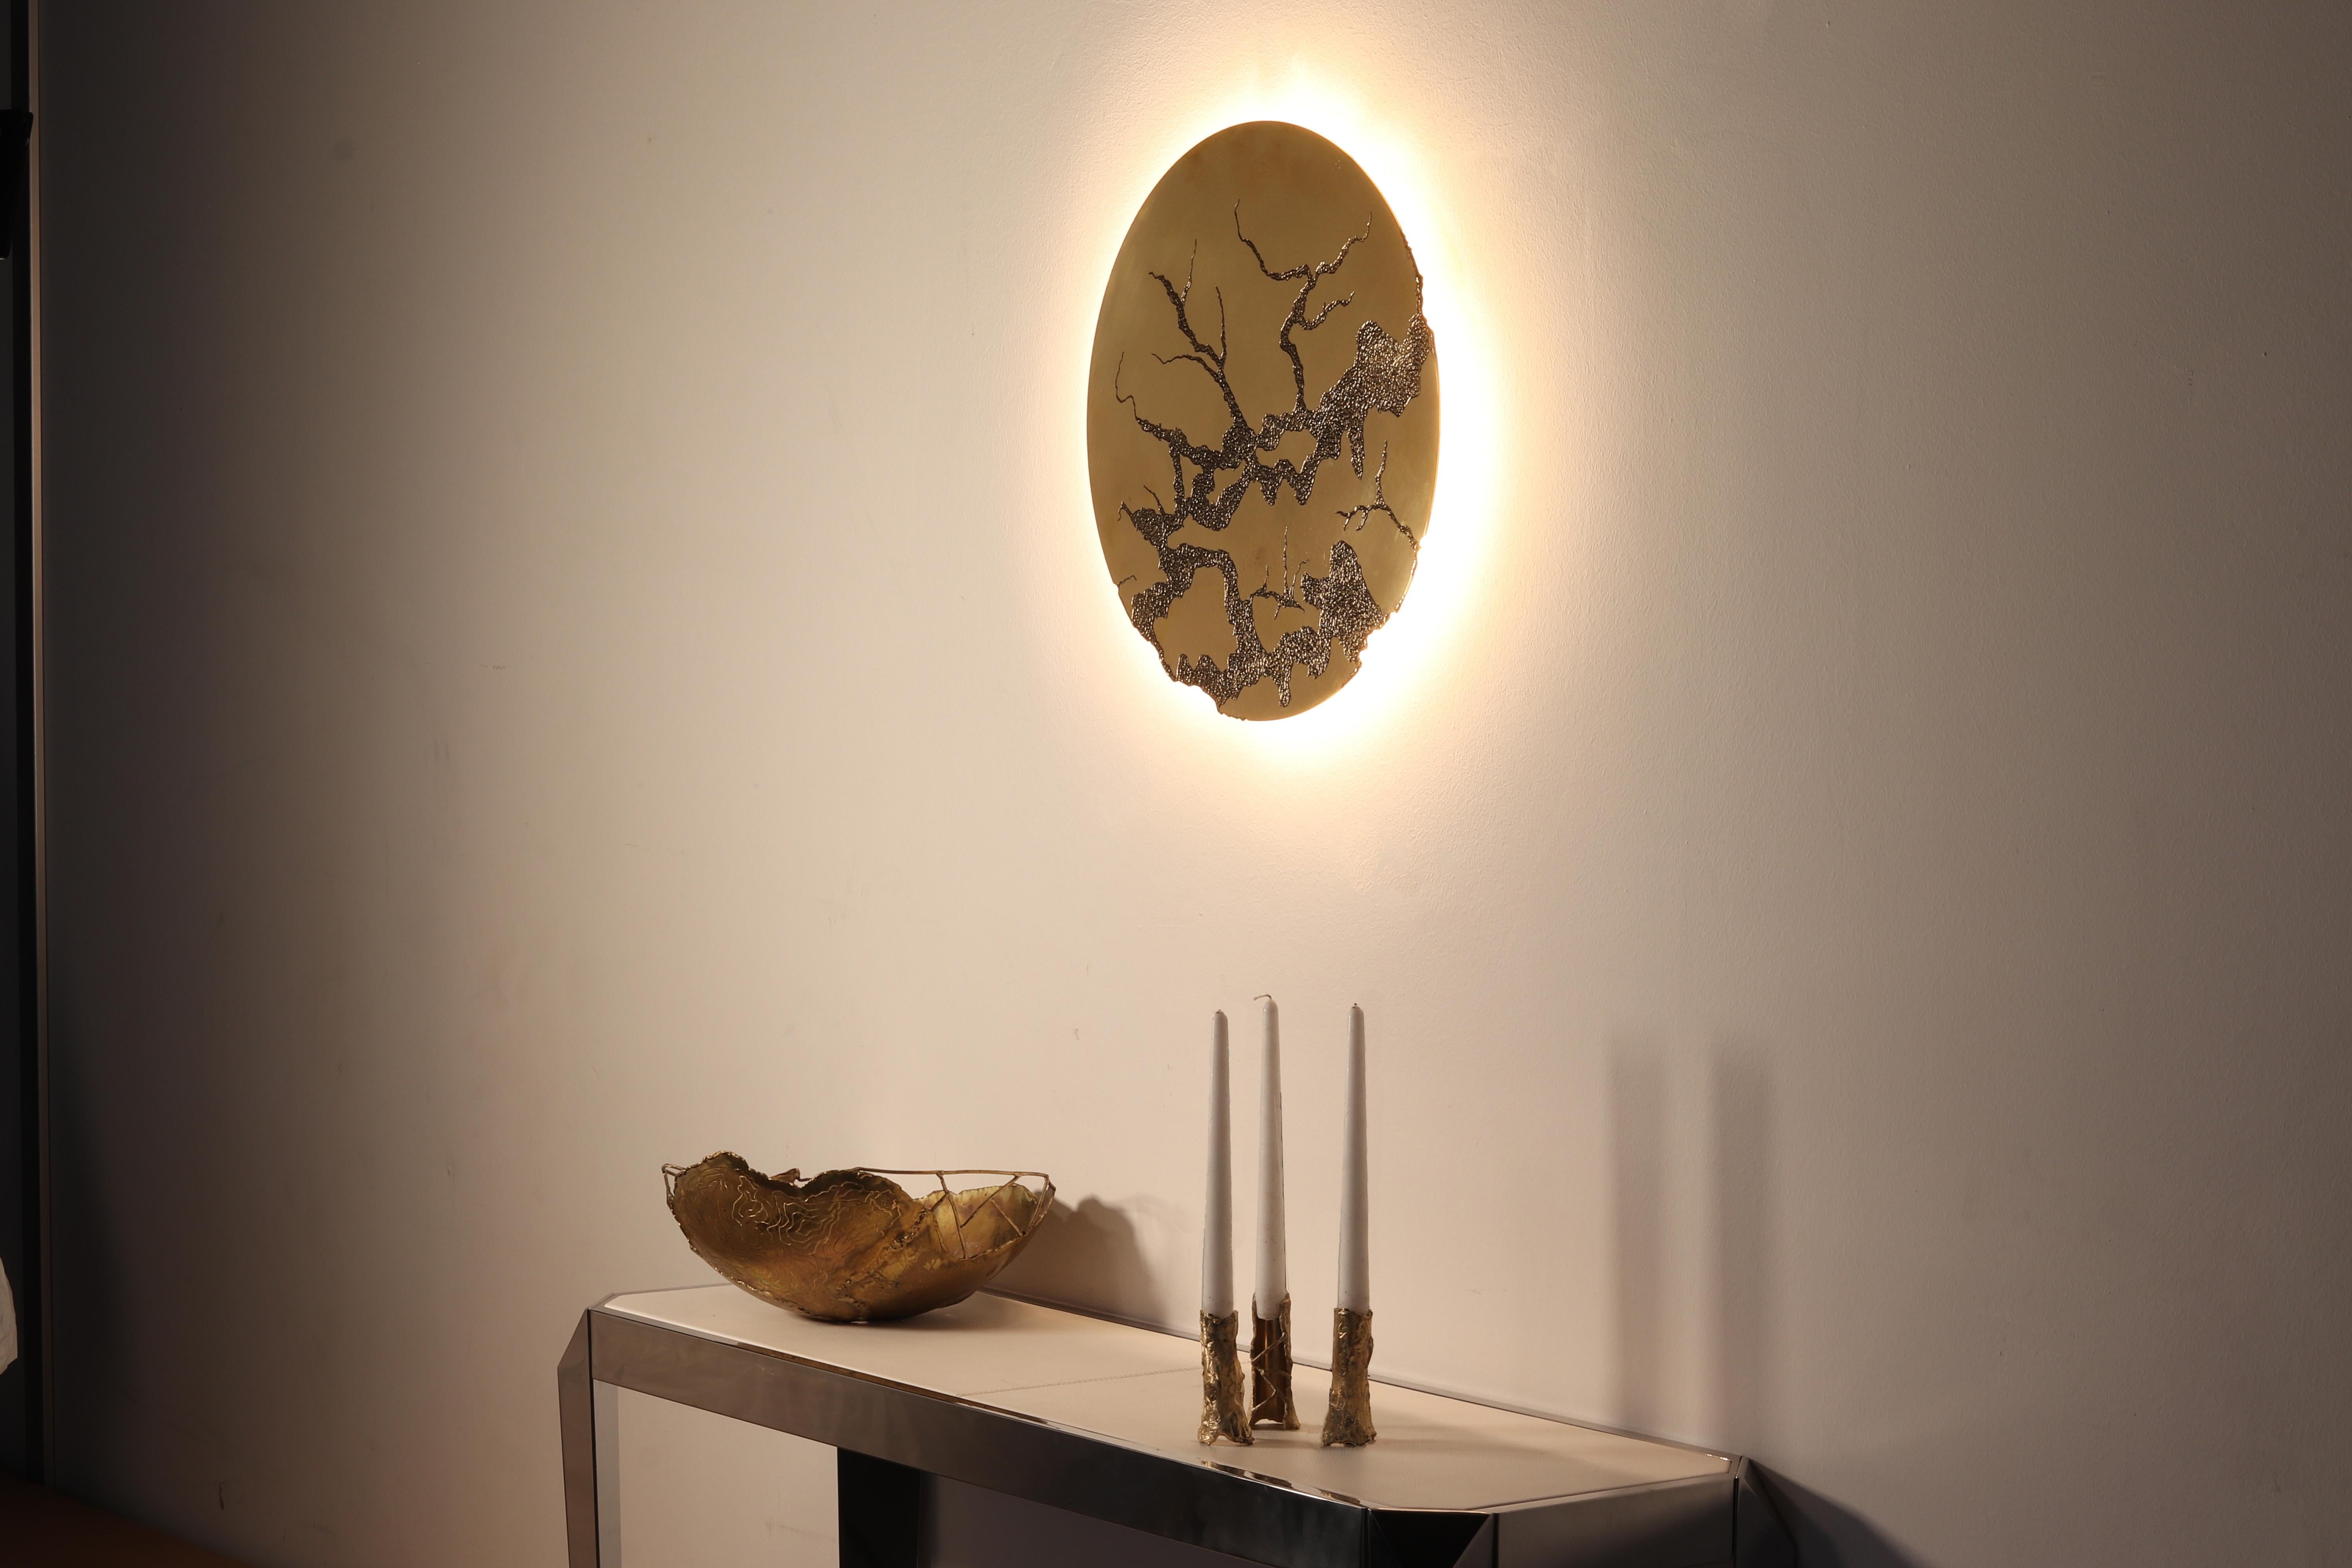 Ice - hand-sculpted enlighted brass mirror by Samuel Costantini
Entirely hand-sculpted by the artist
Measure: diameter 50 cm
diameter 19,685 inches

Ice and Light brass mirror/ lamp
Nature tries to keep its balance despite everything. Winter